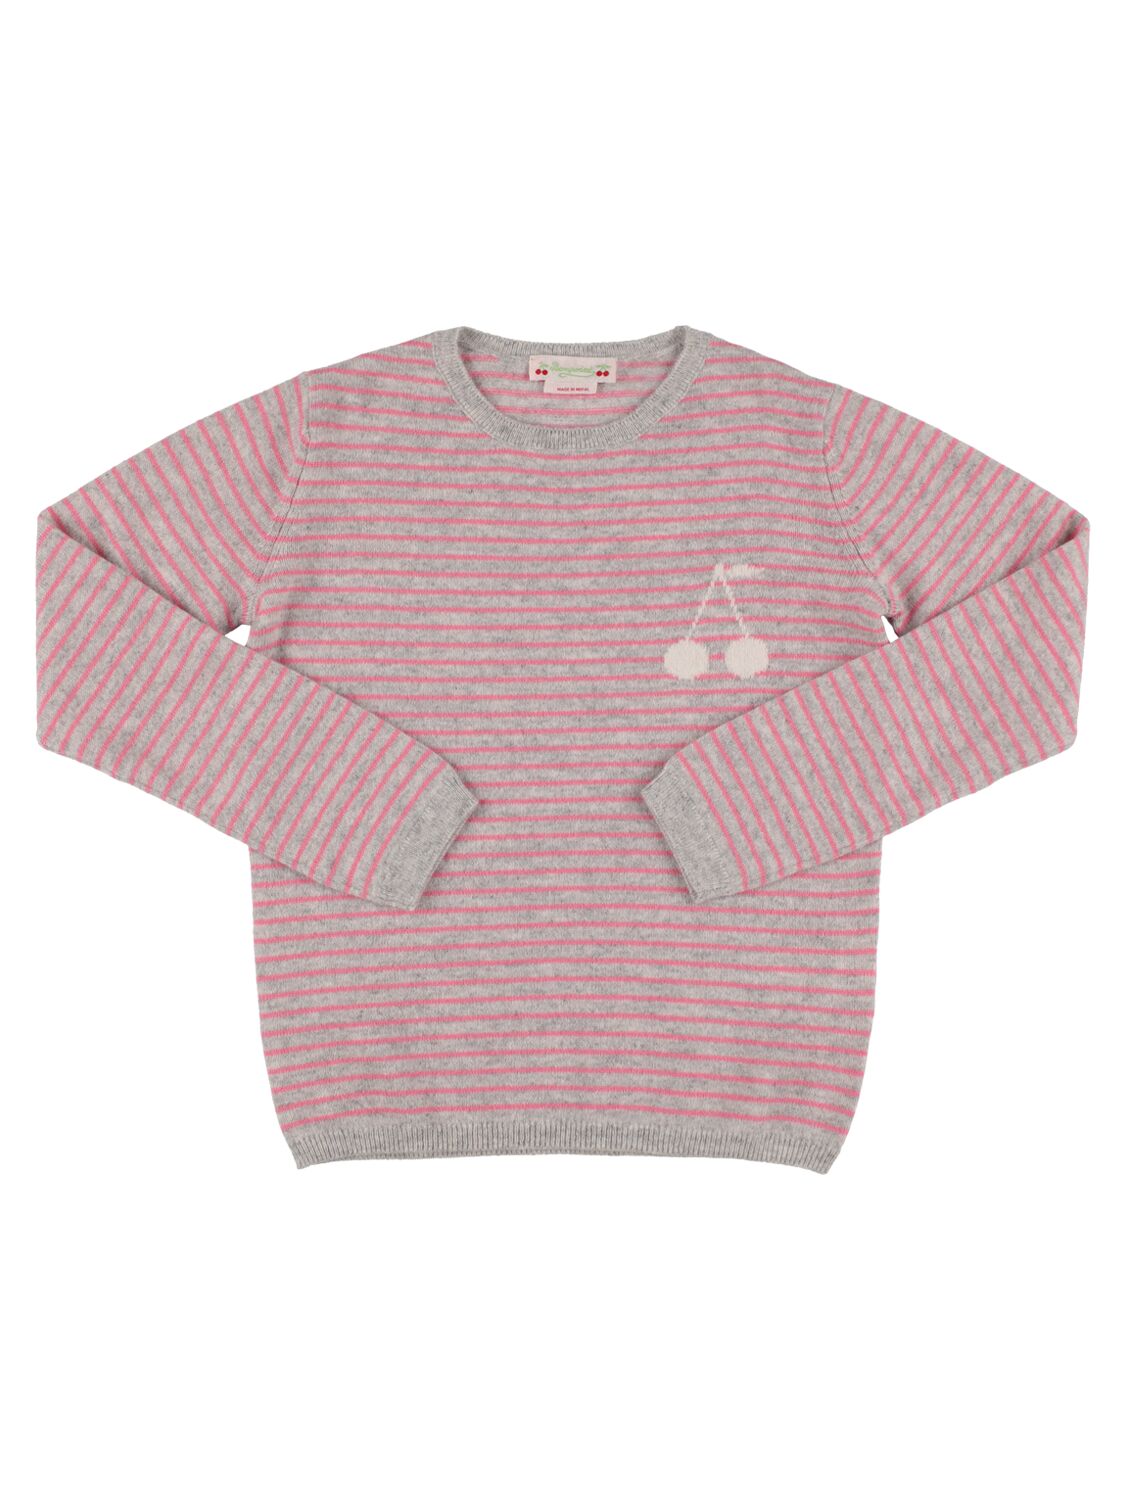 Image of Embroidered Cashmere Knit Sweater